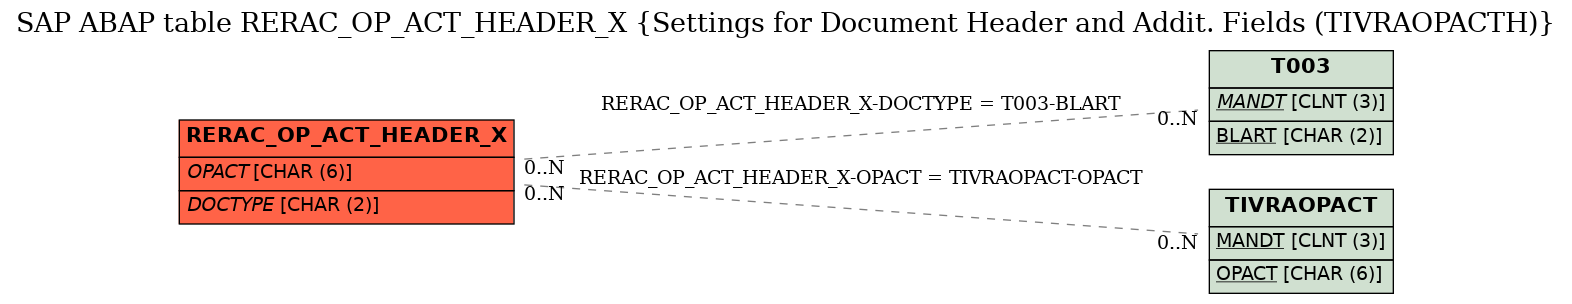 E-R Diagram for table RERAC_OP_ACT_HEADER_X (Settings for Document Header and Addit. Fields (TIVRAOPACTH))